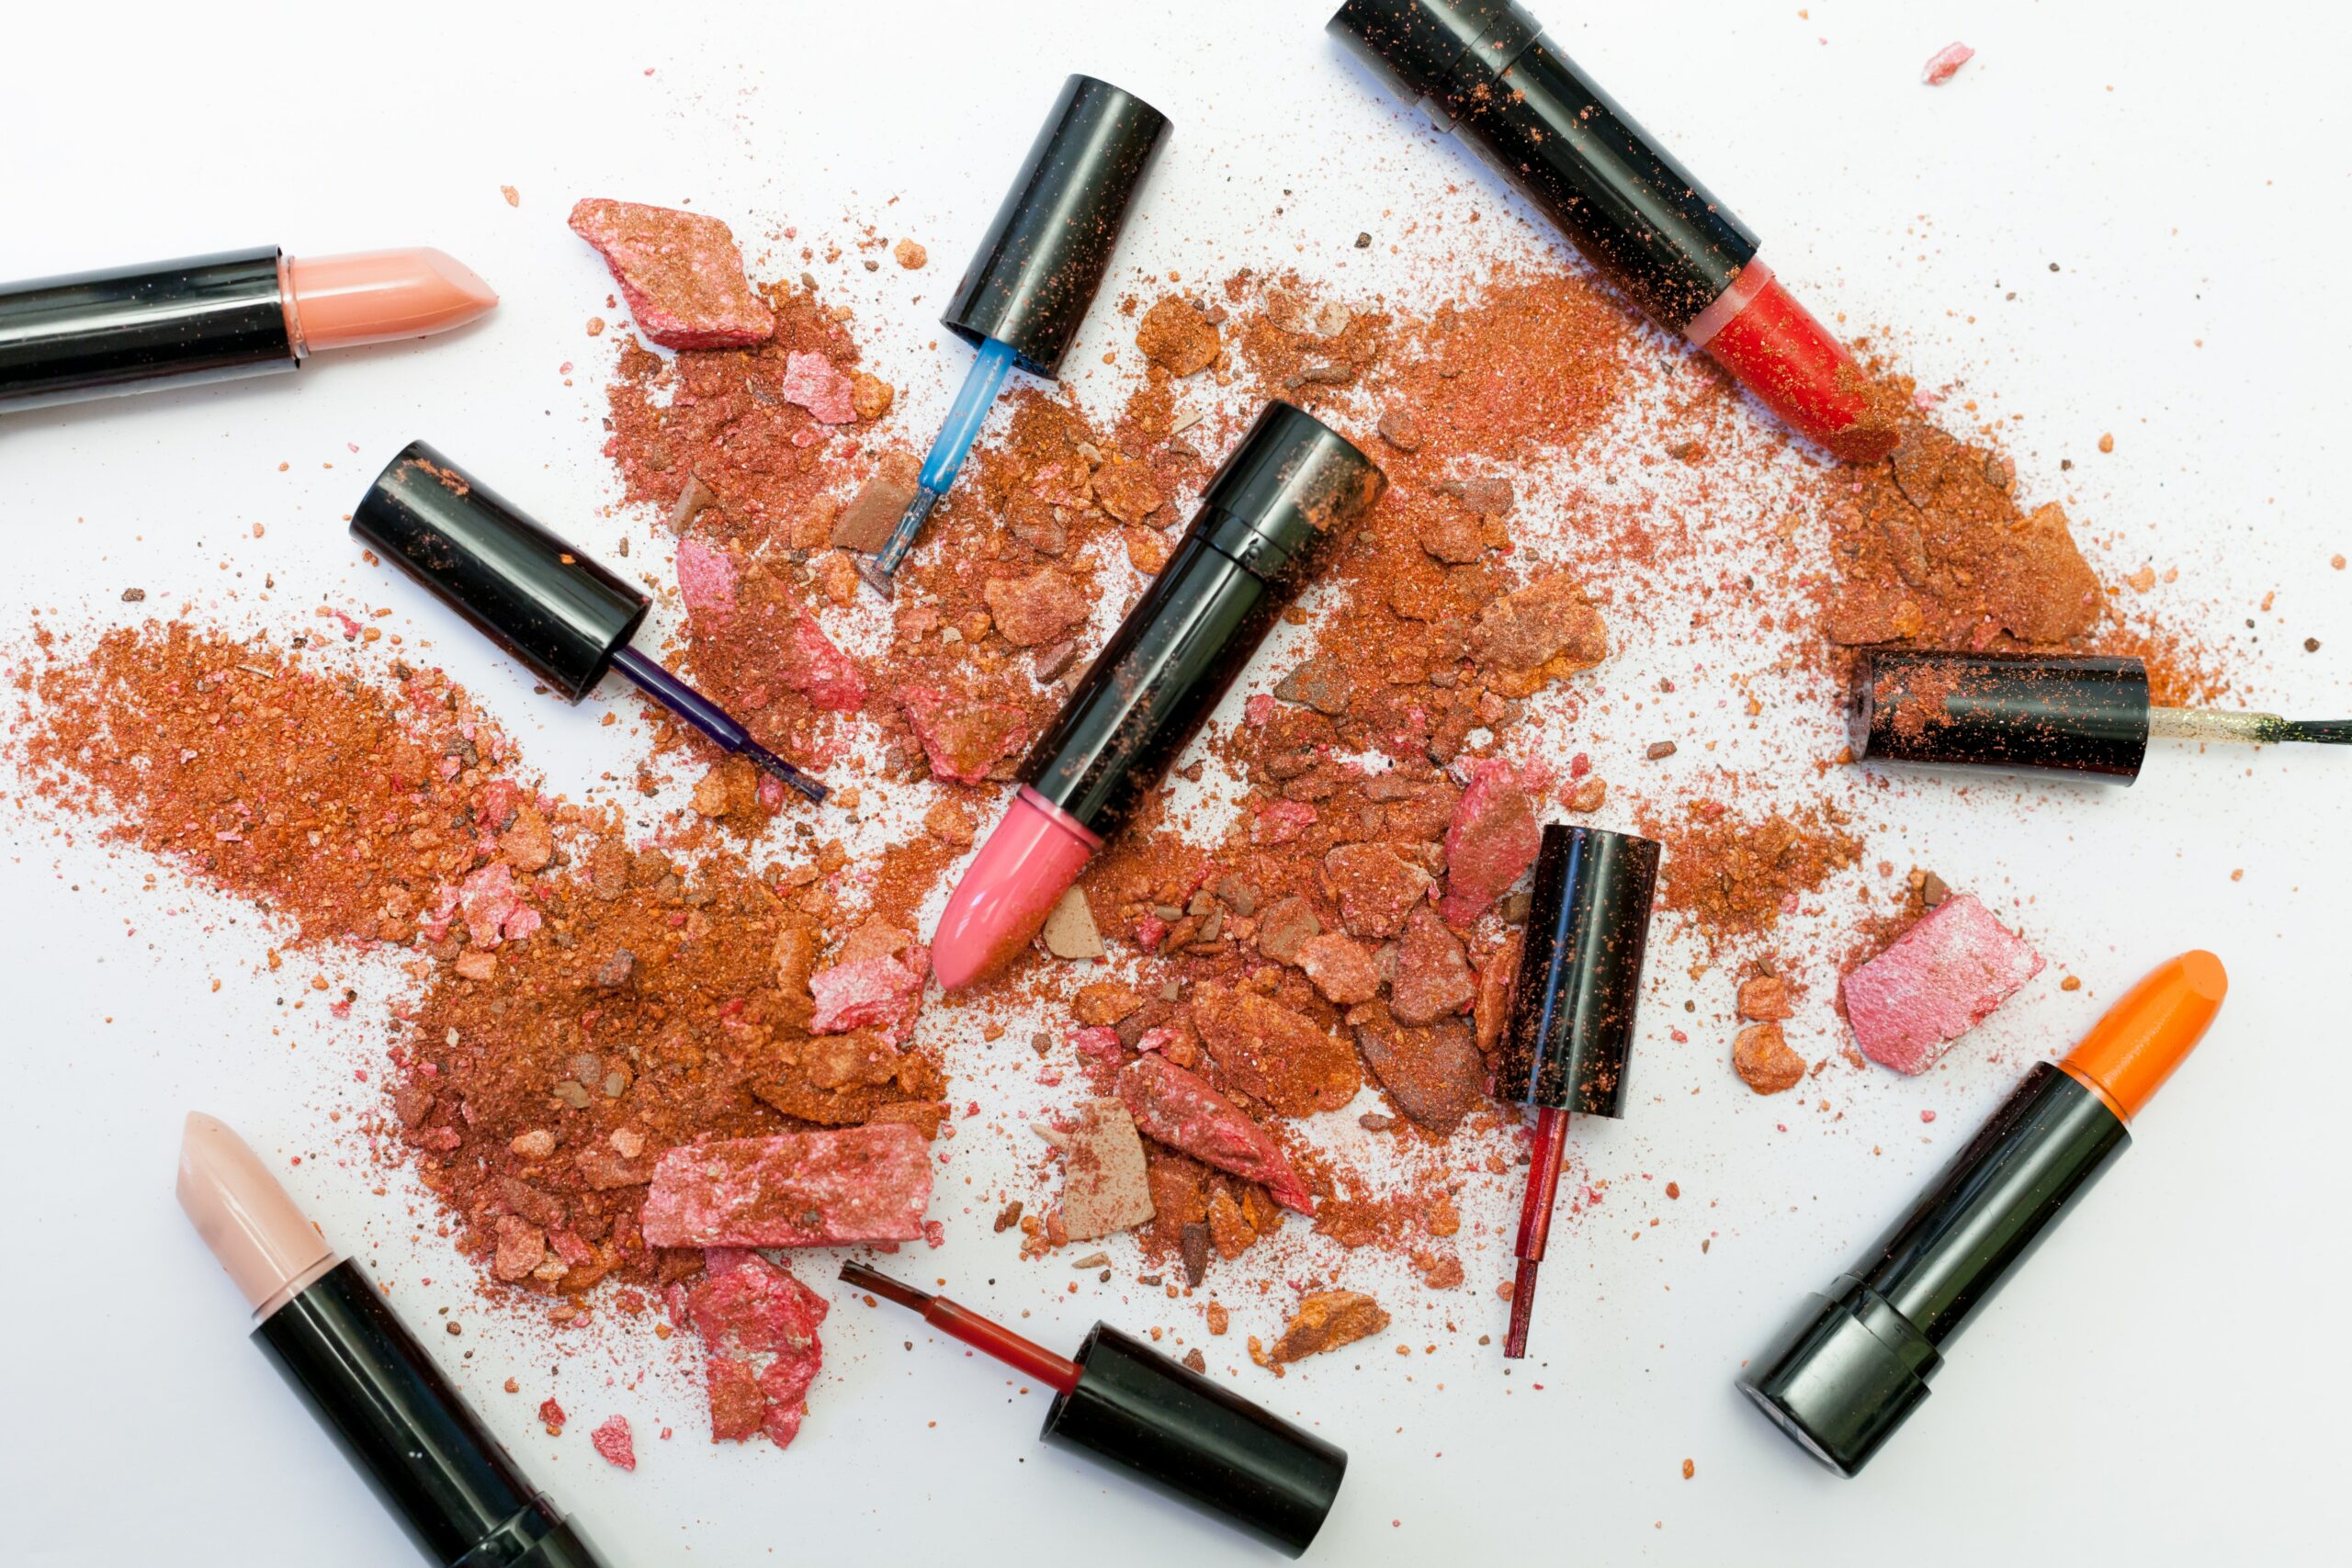 rim snave Express Forever chemicals' could be lurking in your lipstick | Popular Science